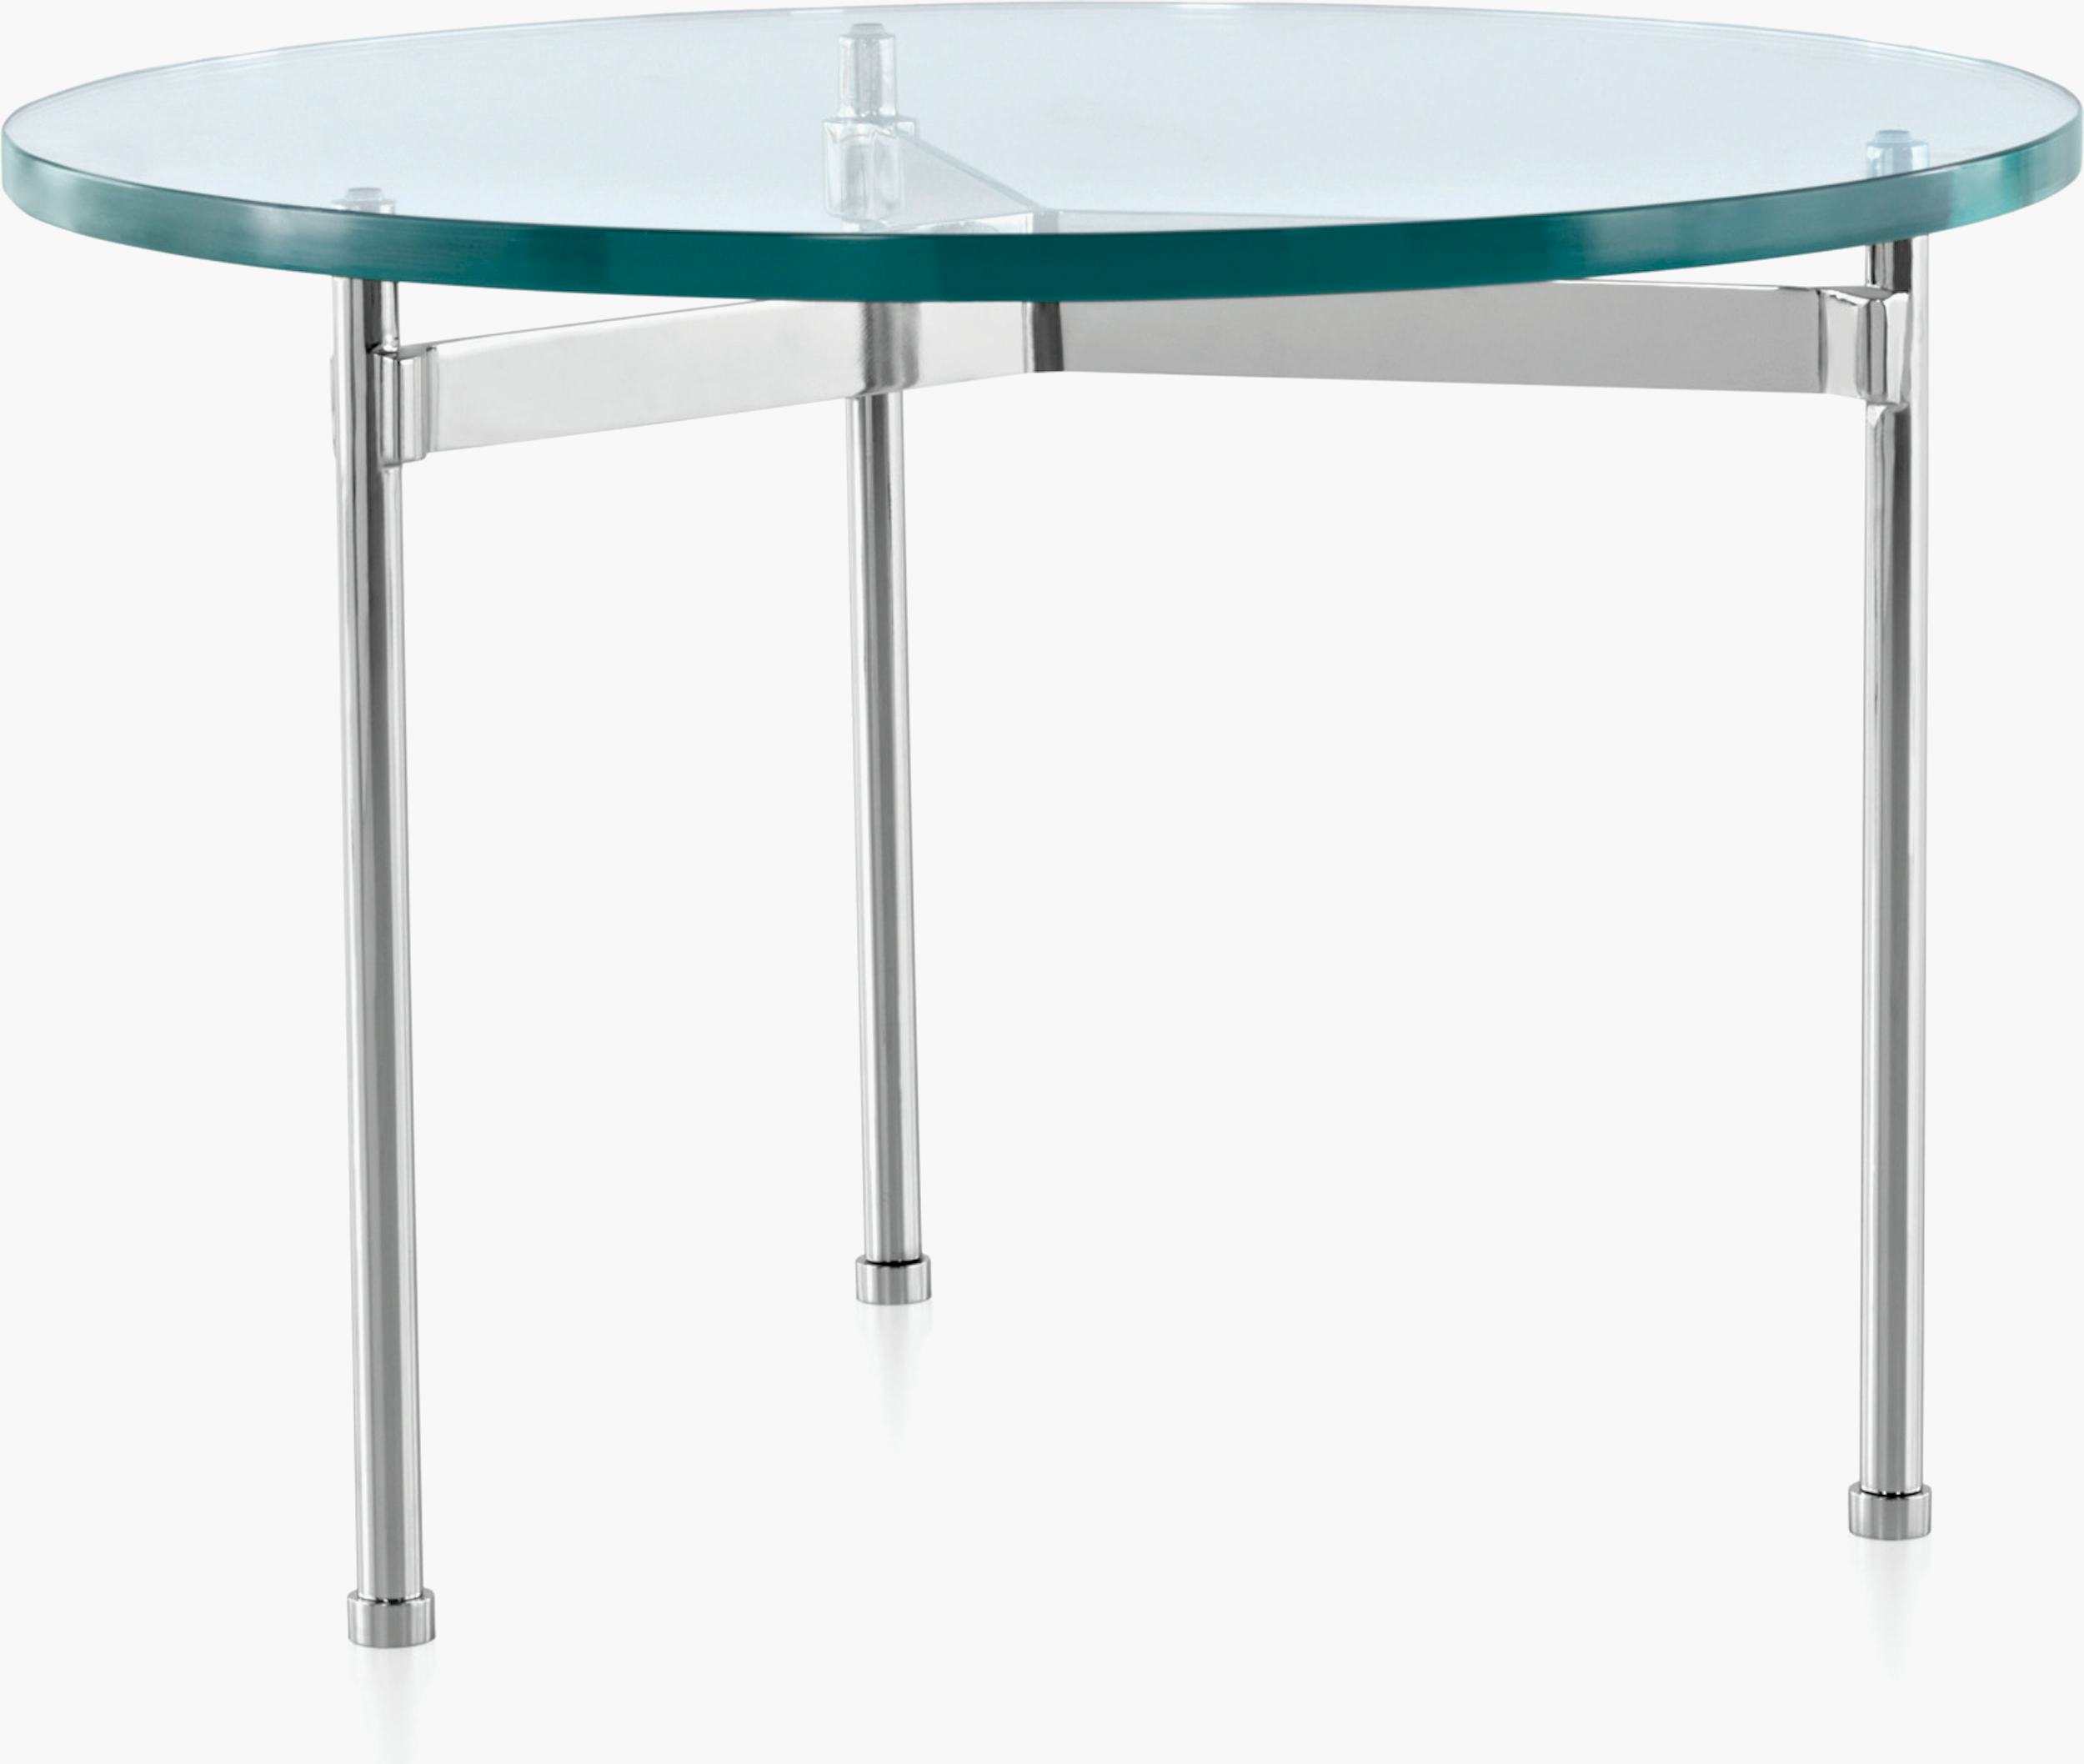 Claw Table – Within Reach Design